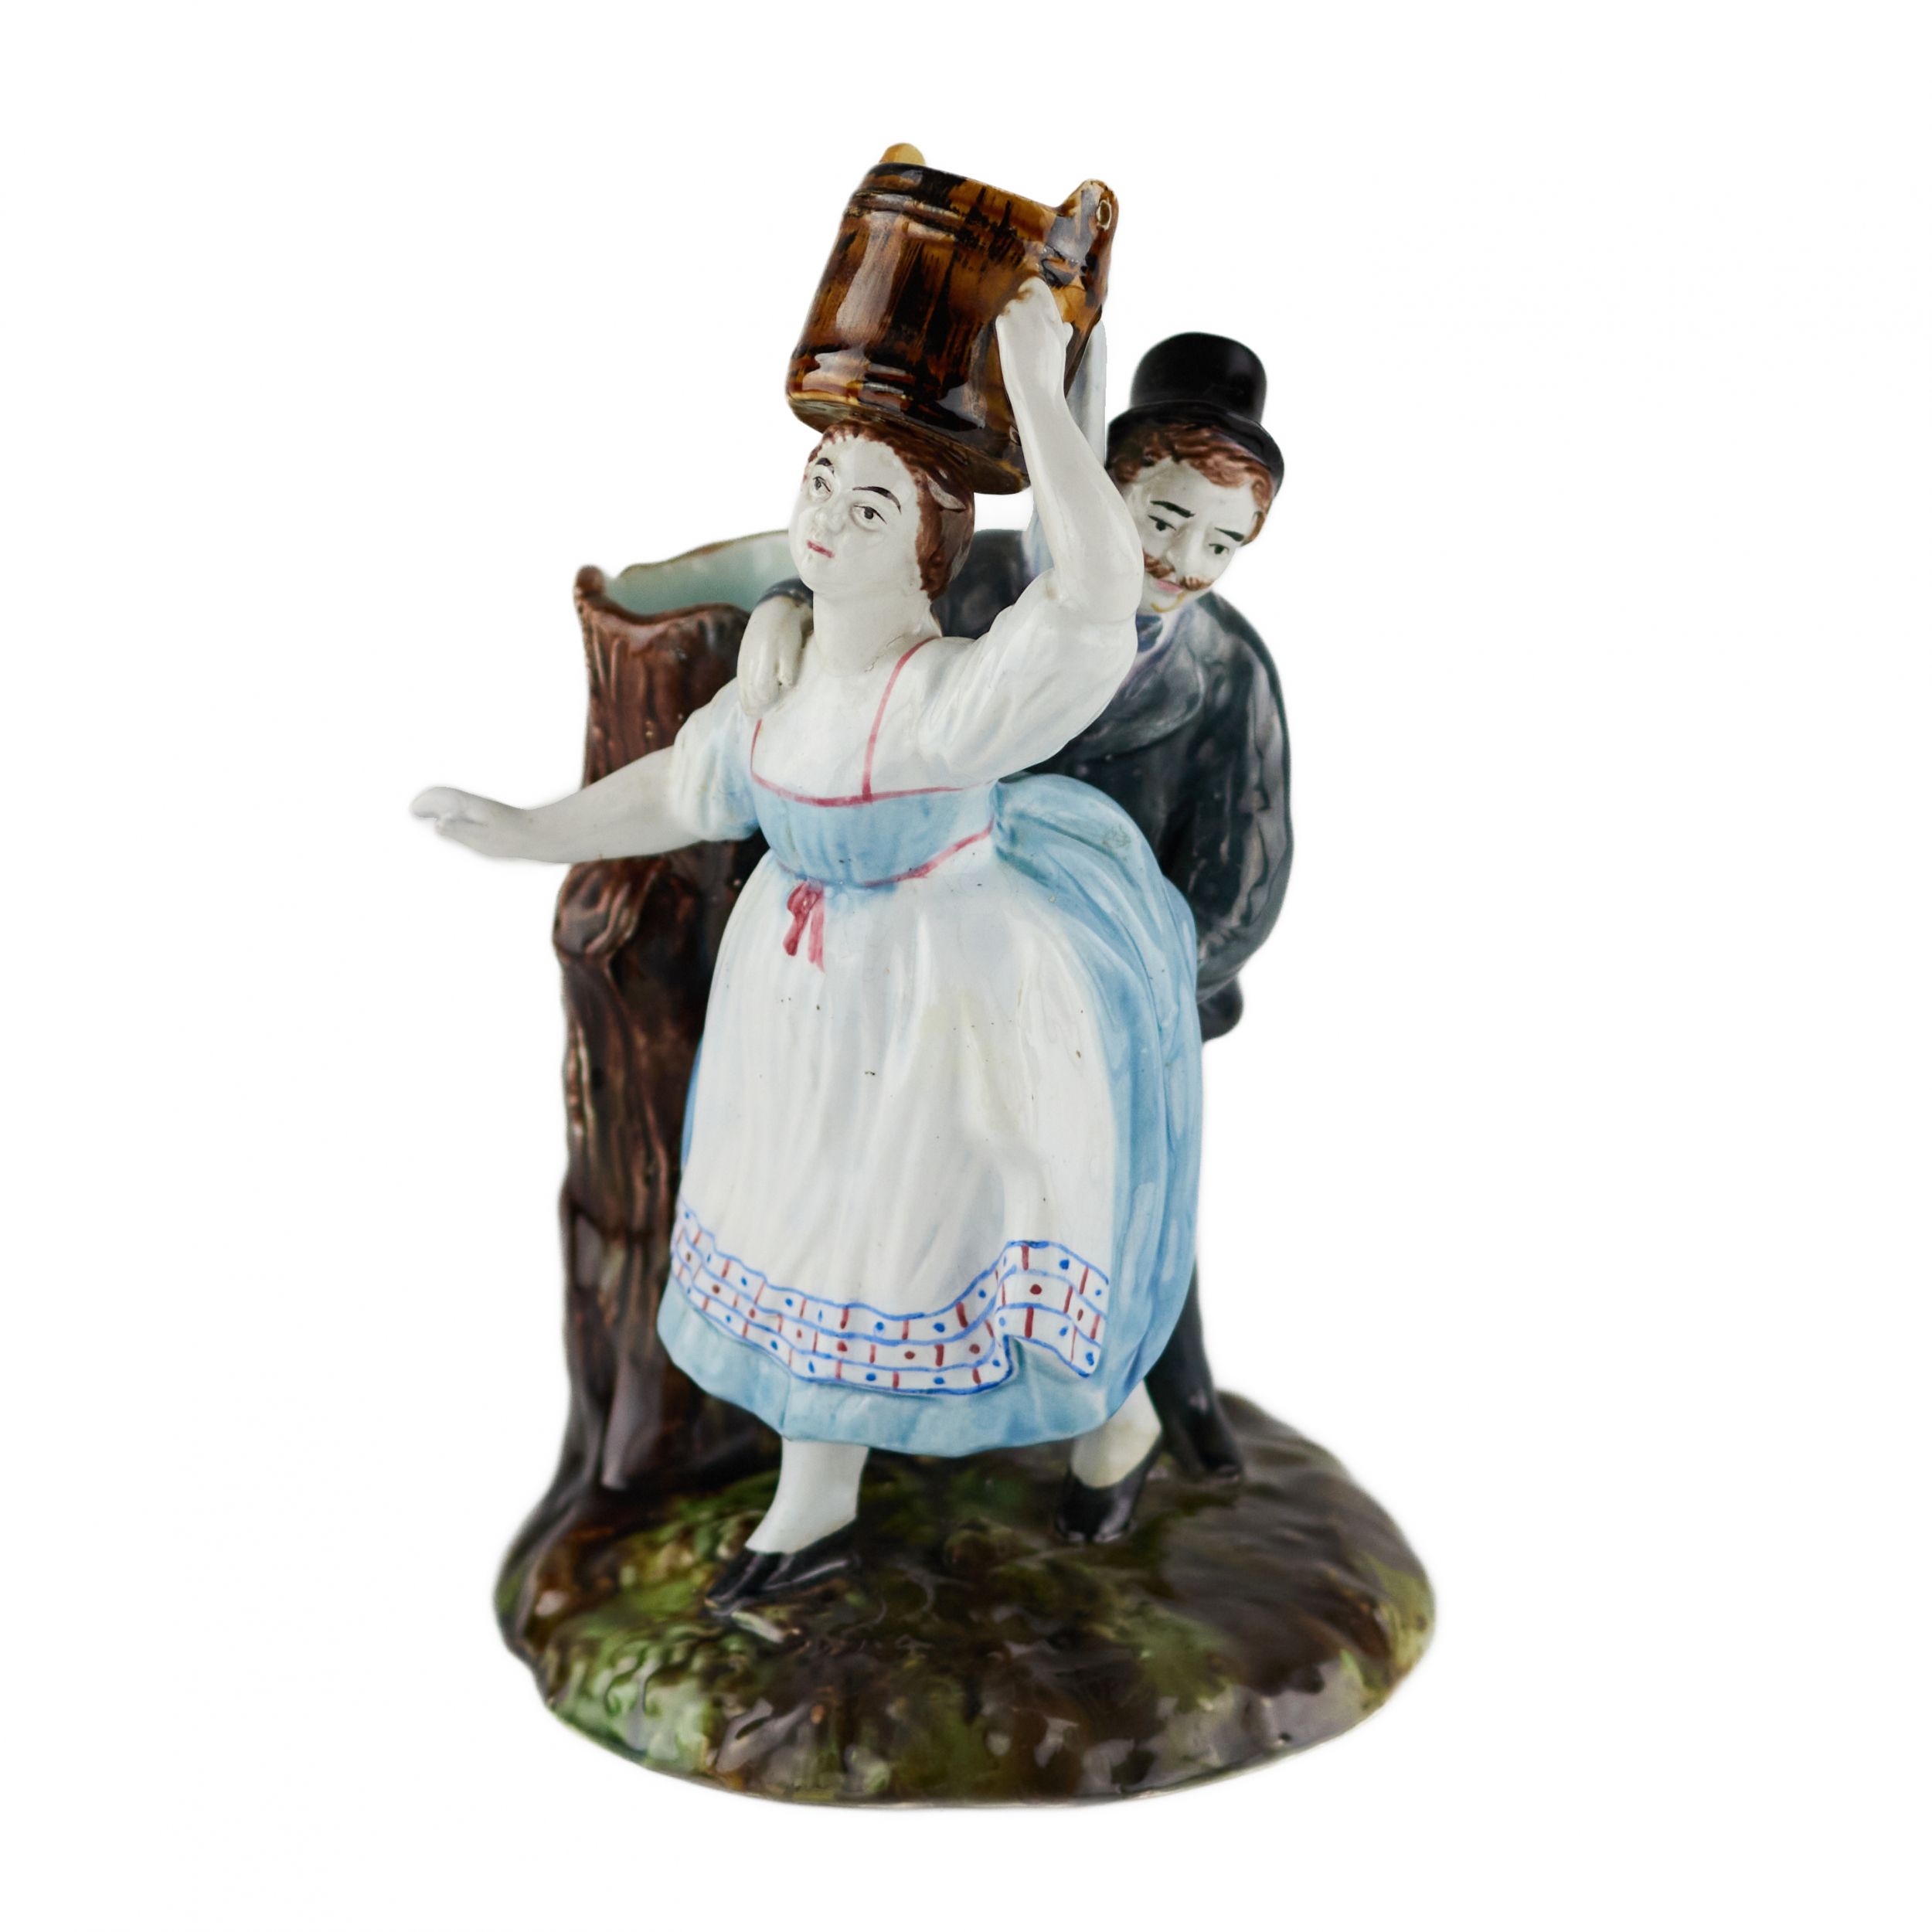 Faience pencil figurine The Villager and the Lord. Kuznetsov factory in Tver. 19th century. - Image 2 of 9